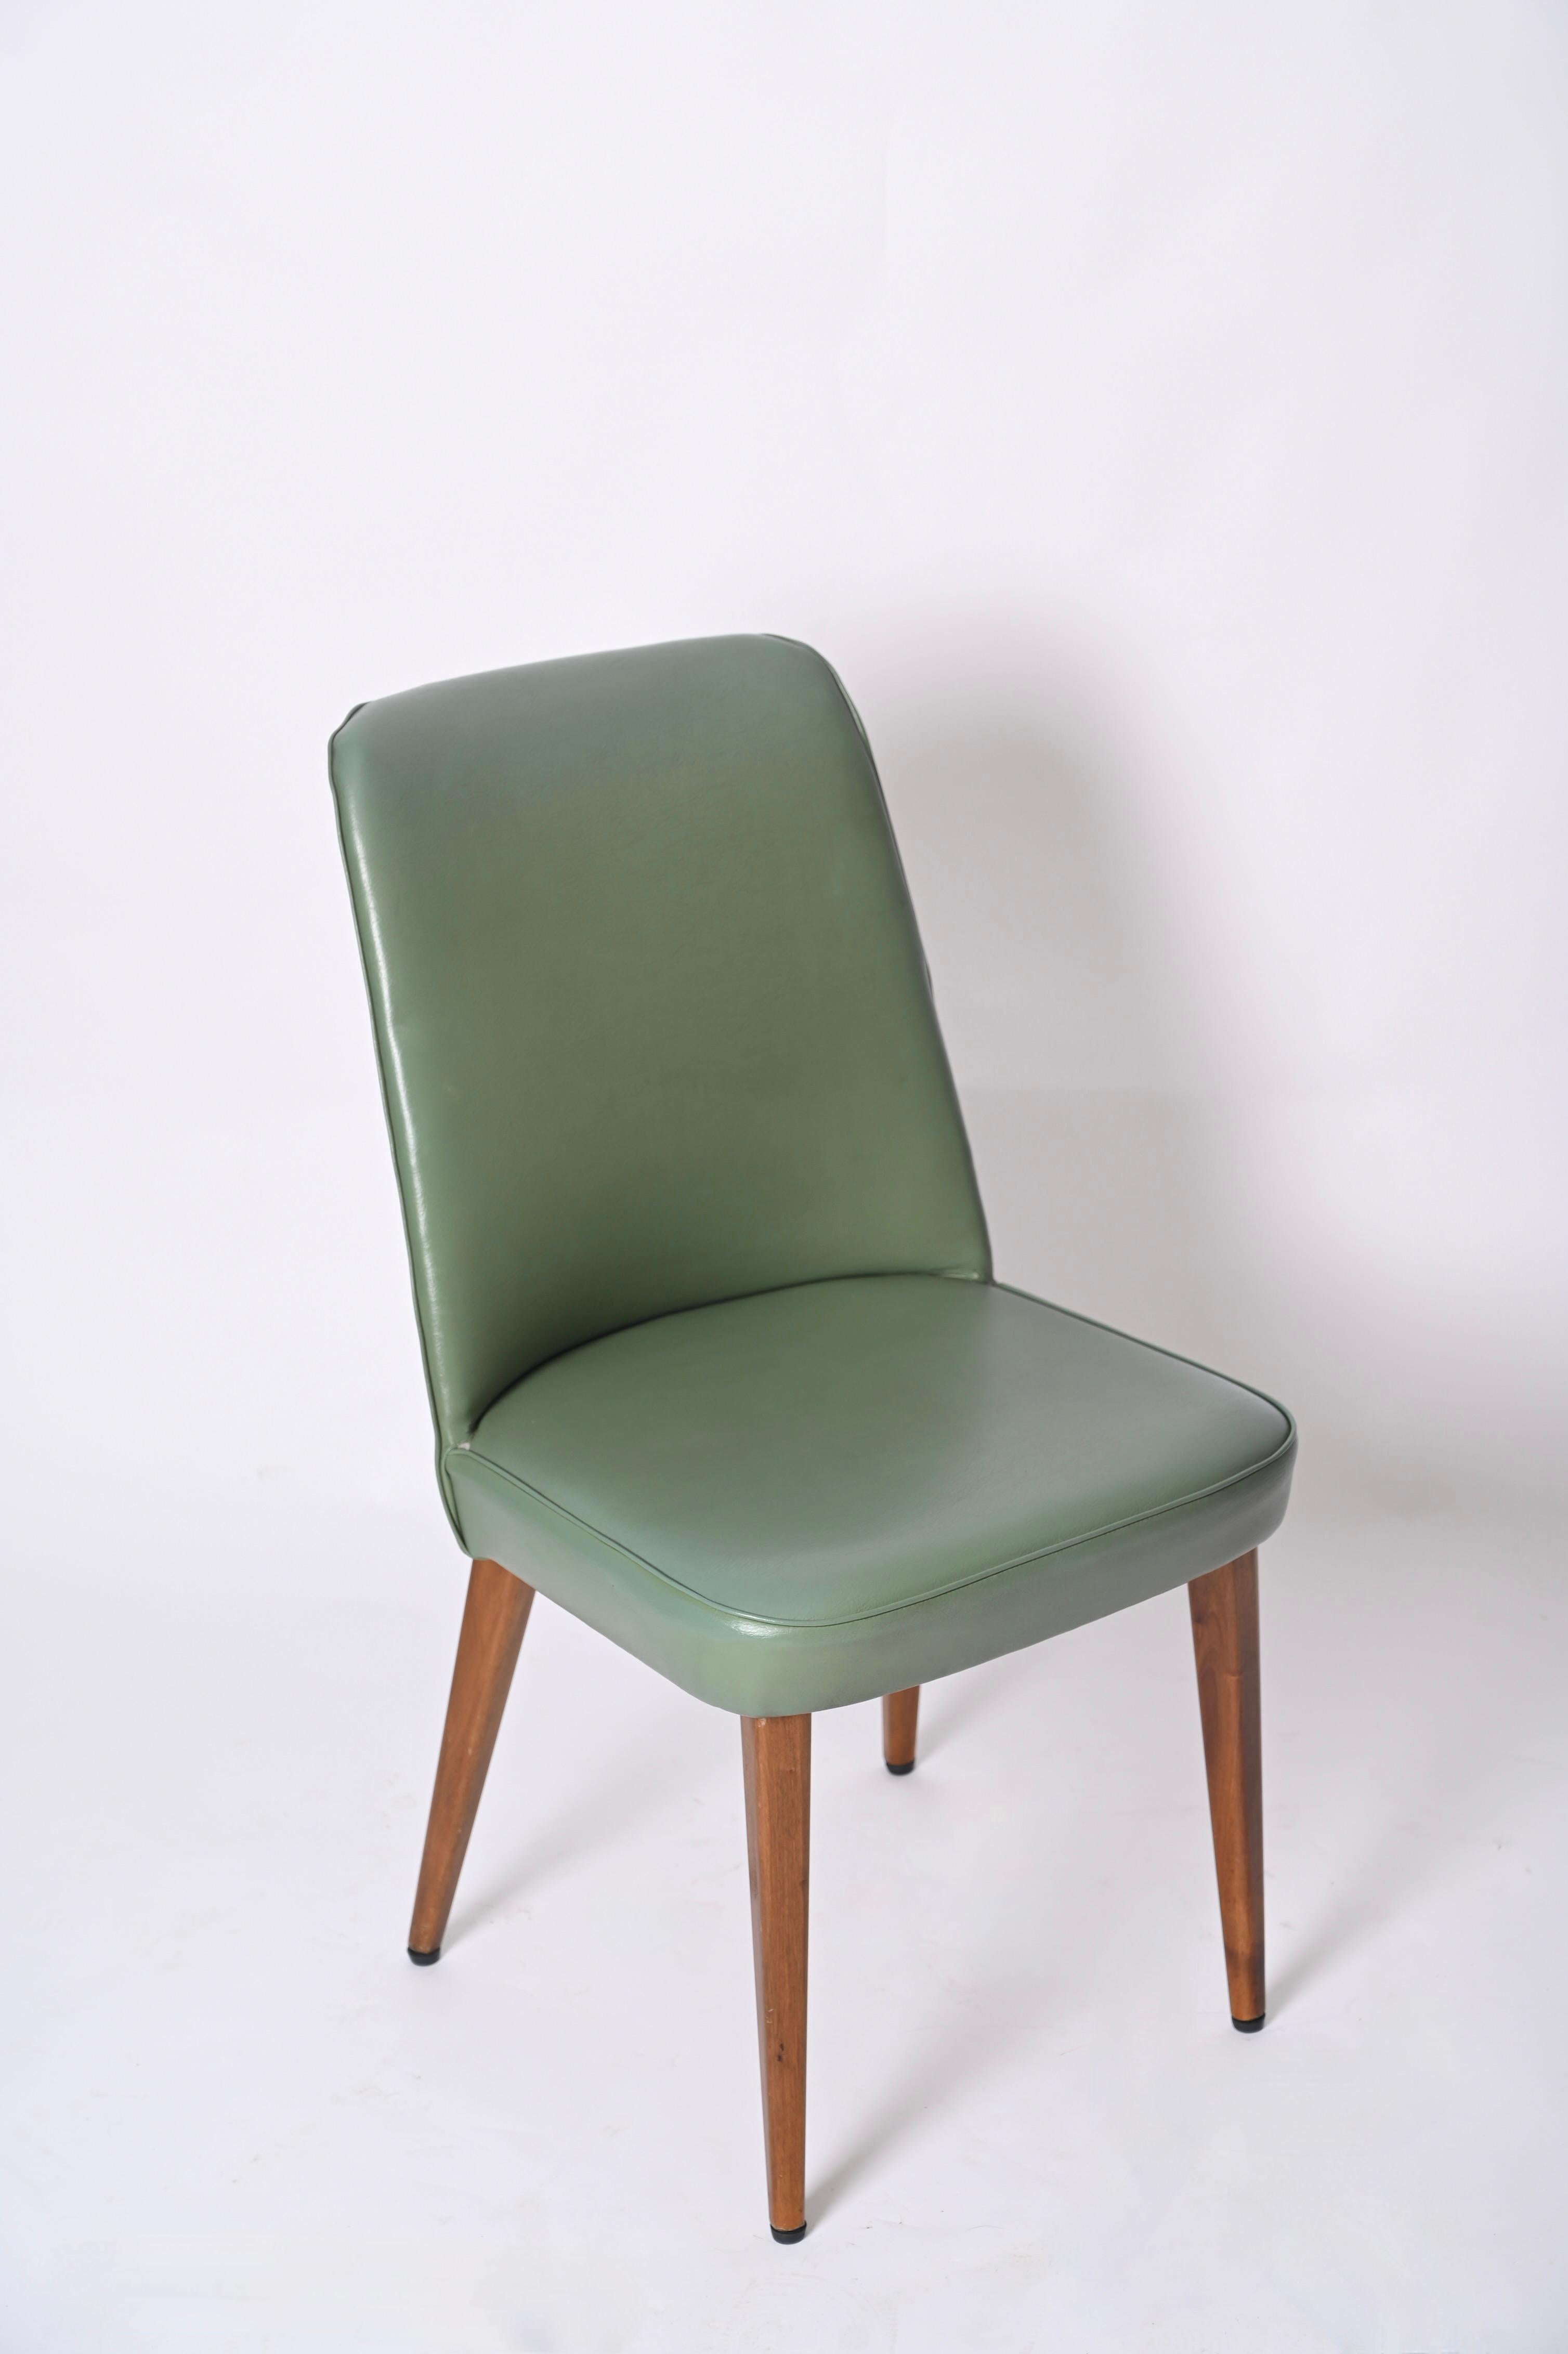 Stunning green sky leather chair by Anonima Castelli Bologna Italy. This beautiful chair was produced in Italy in the 1950s.

Padded and covered in the original green leather, the chair features four legs in beechwood that pair extraordinary well